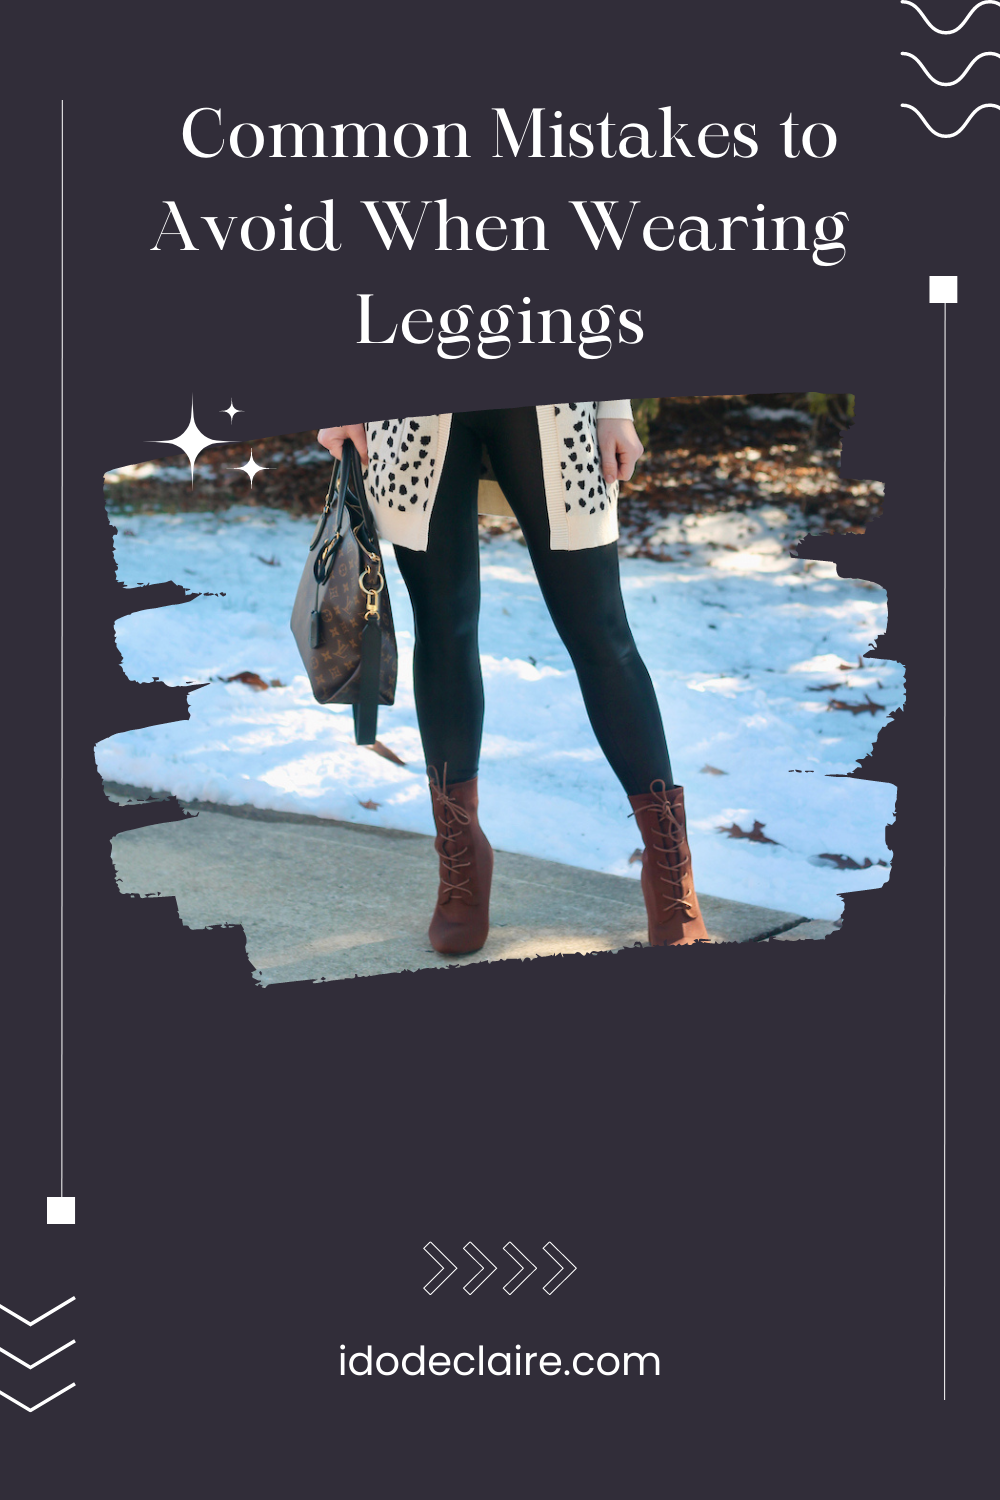 7 Common Mistakes People Make When Wearing Leggings